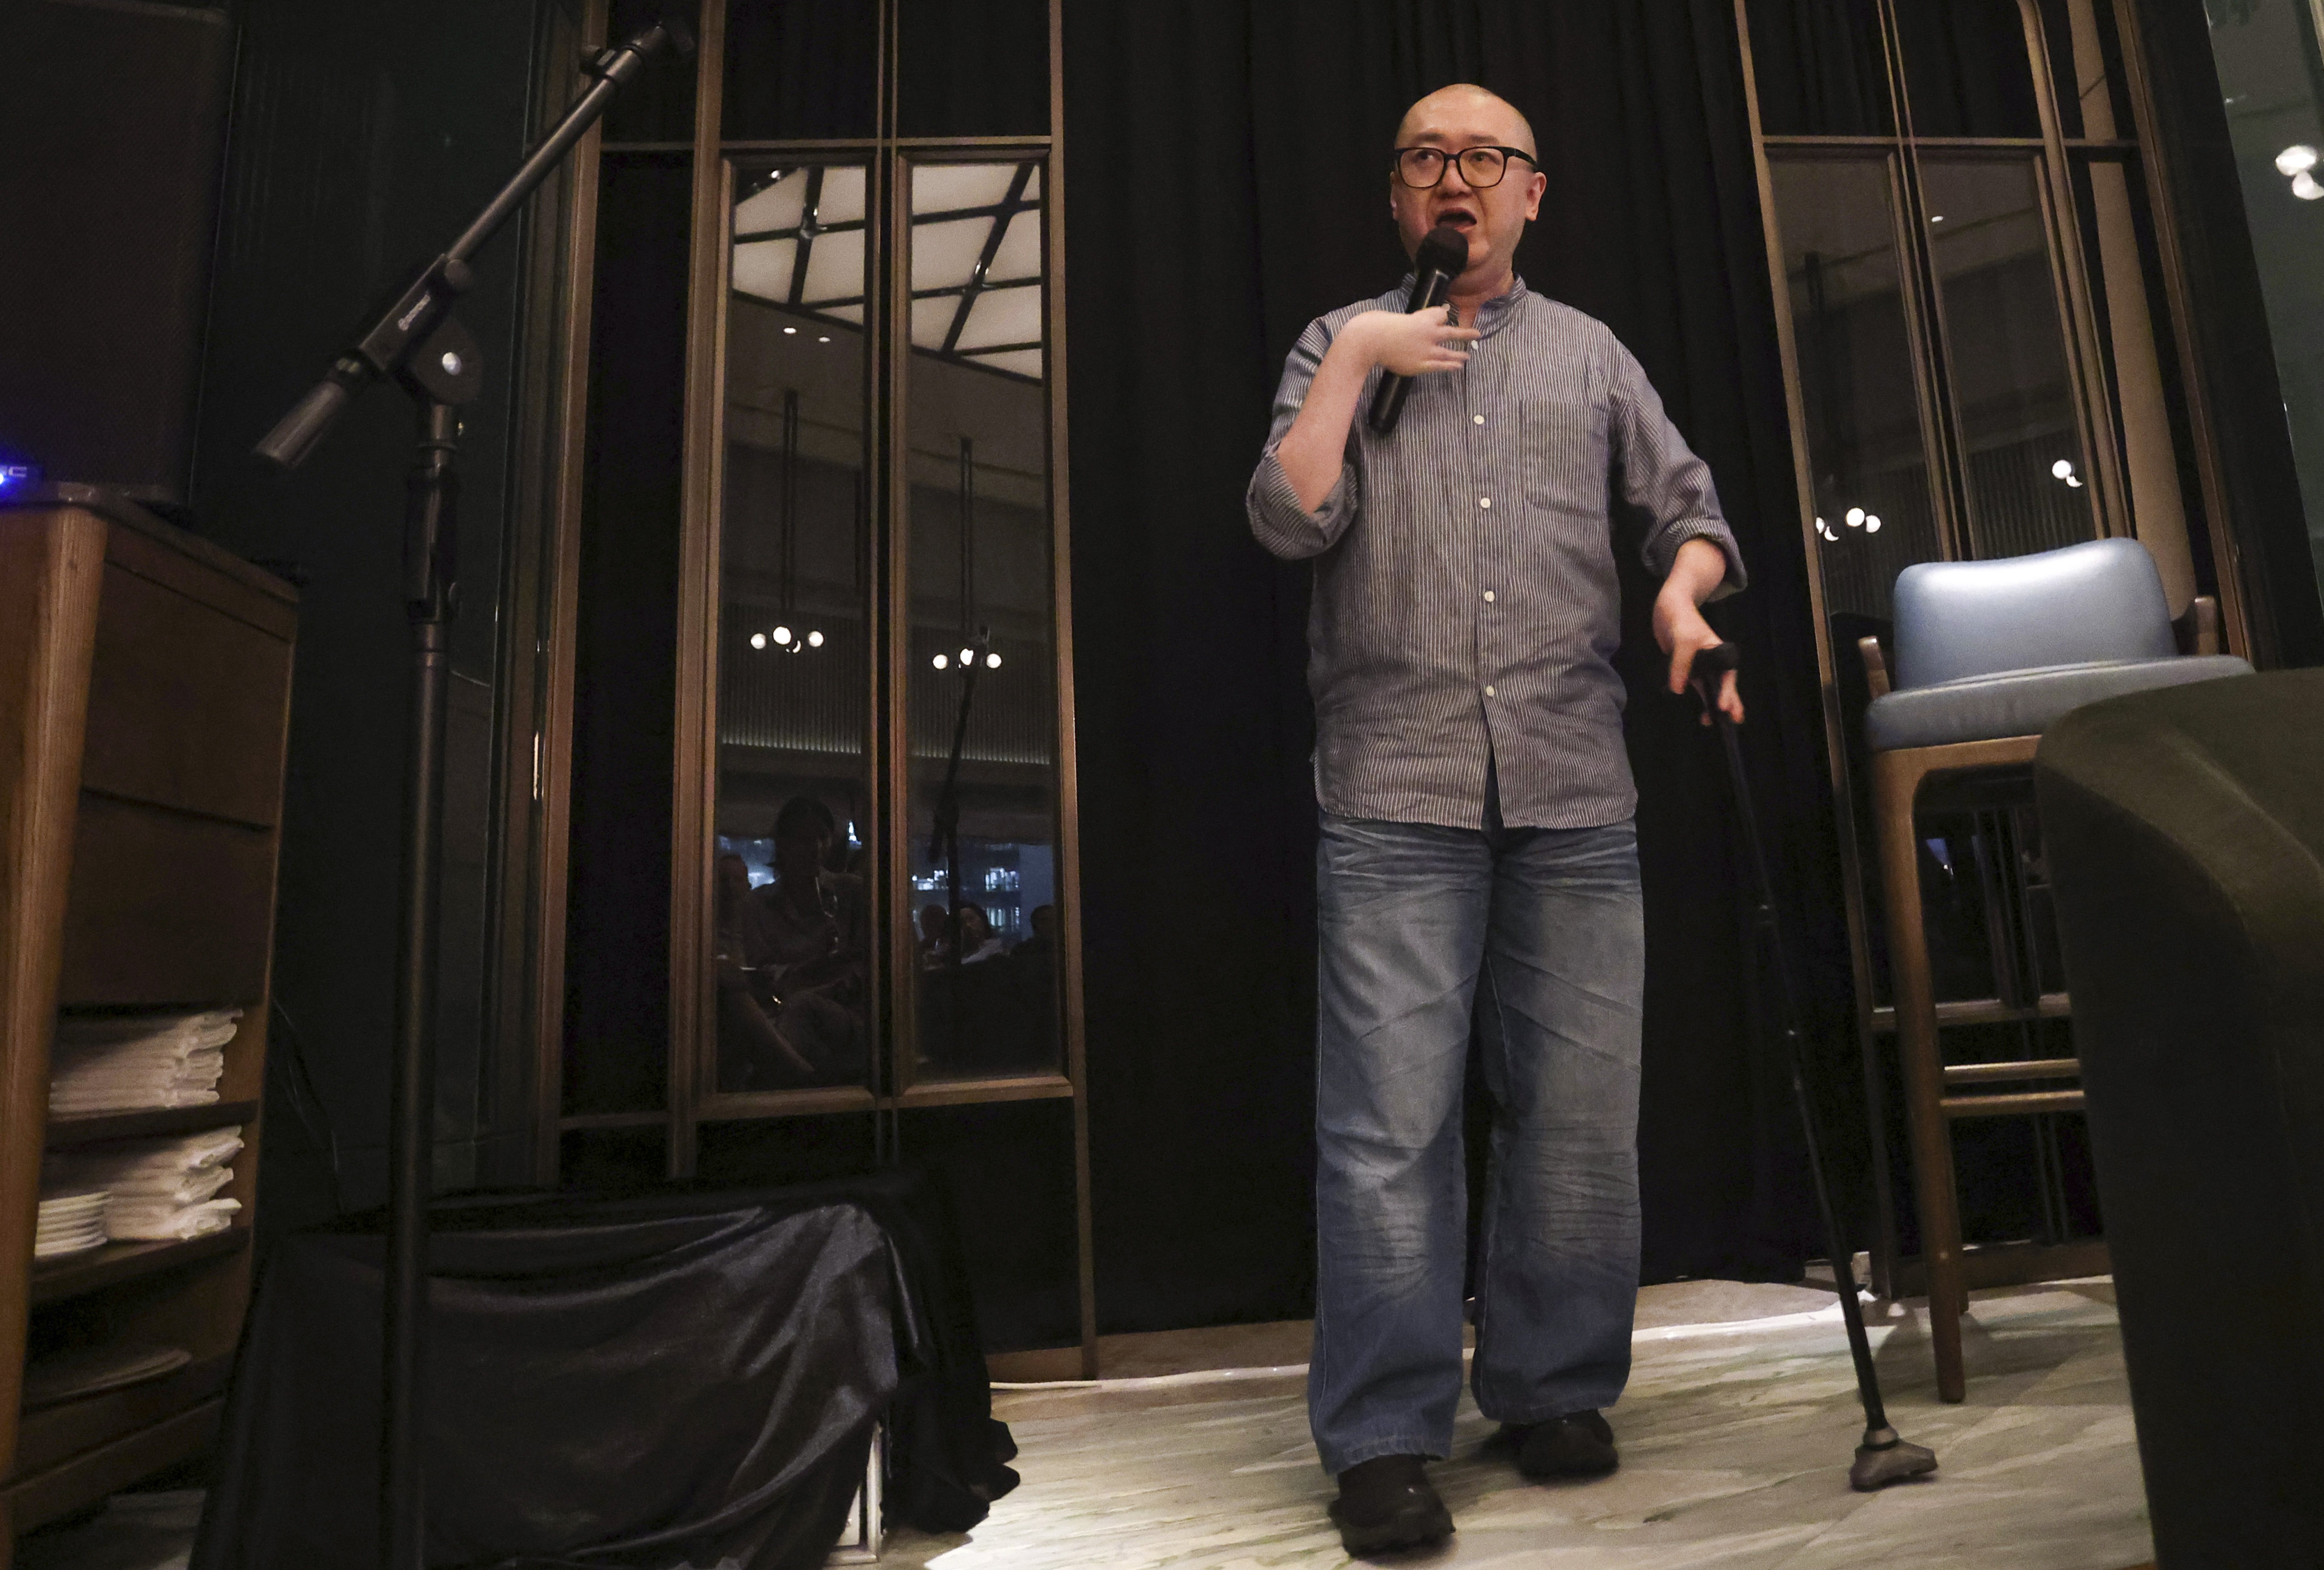 Comedian Steven Lee performs at the Upper House in Admiralty. Photo: Jonathan Wong